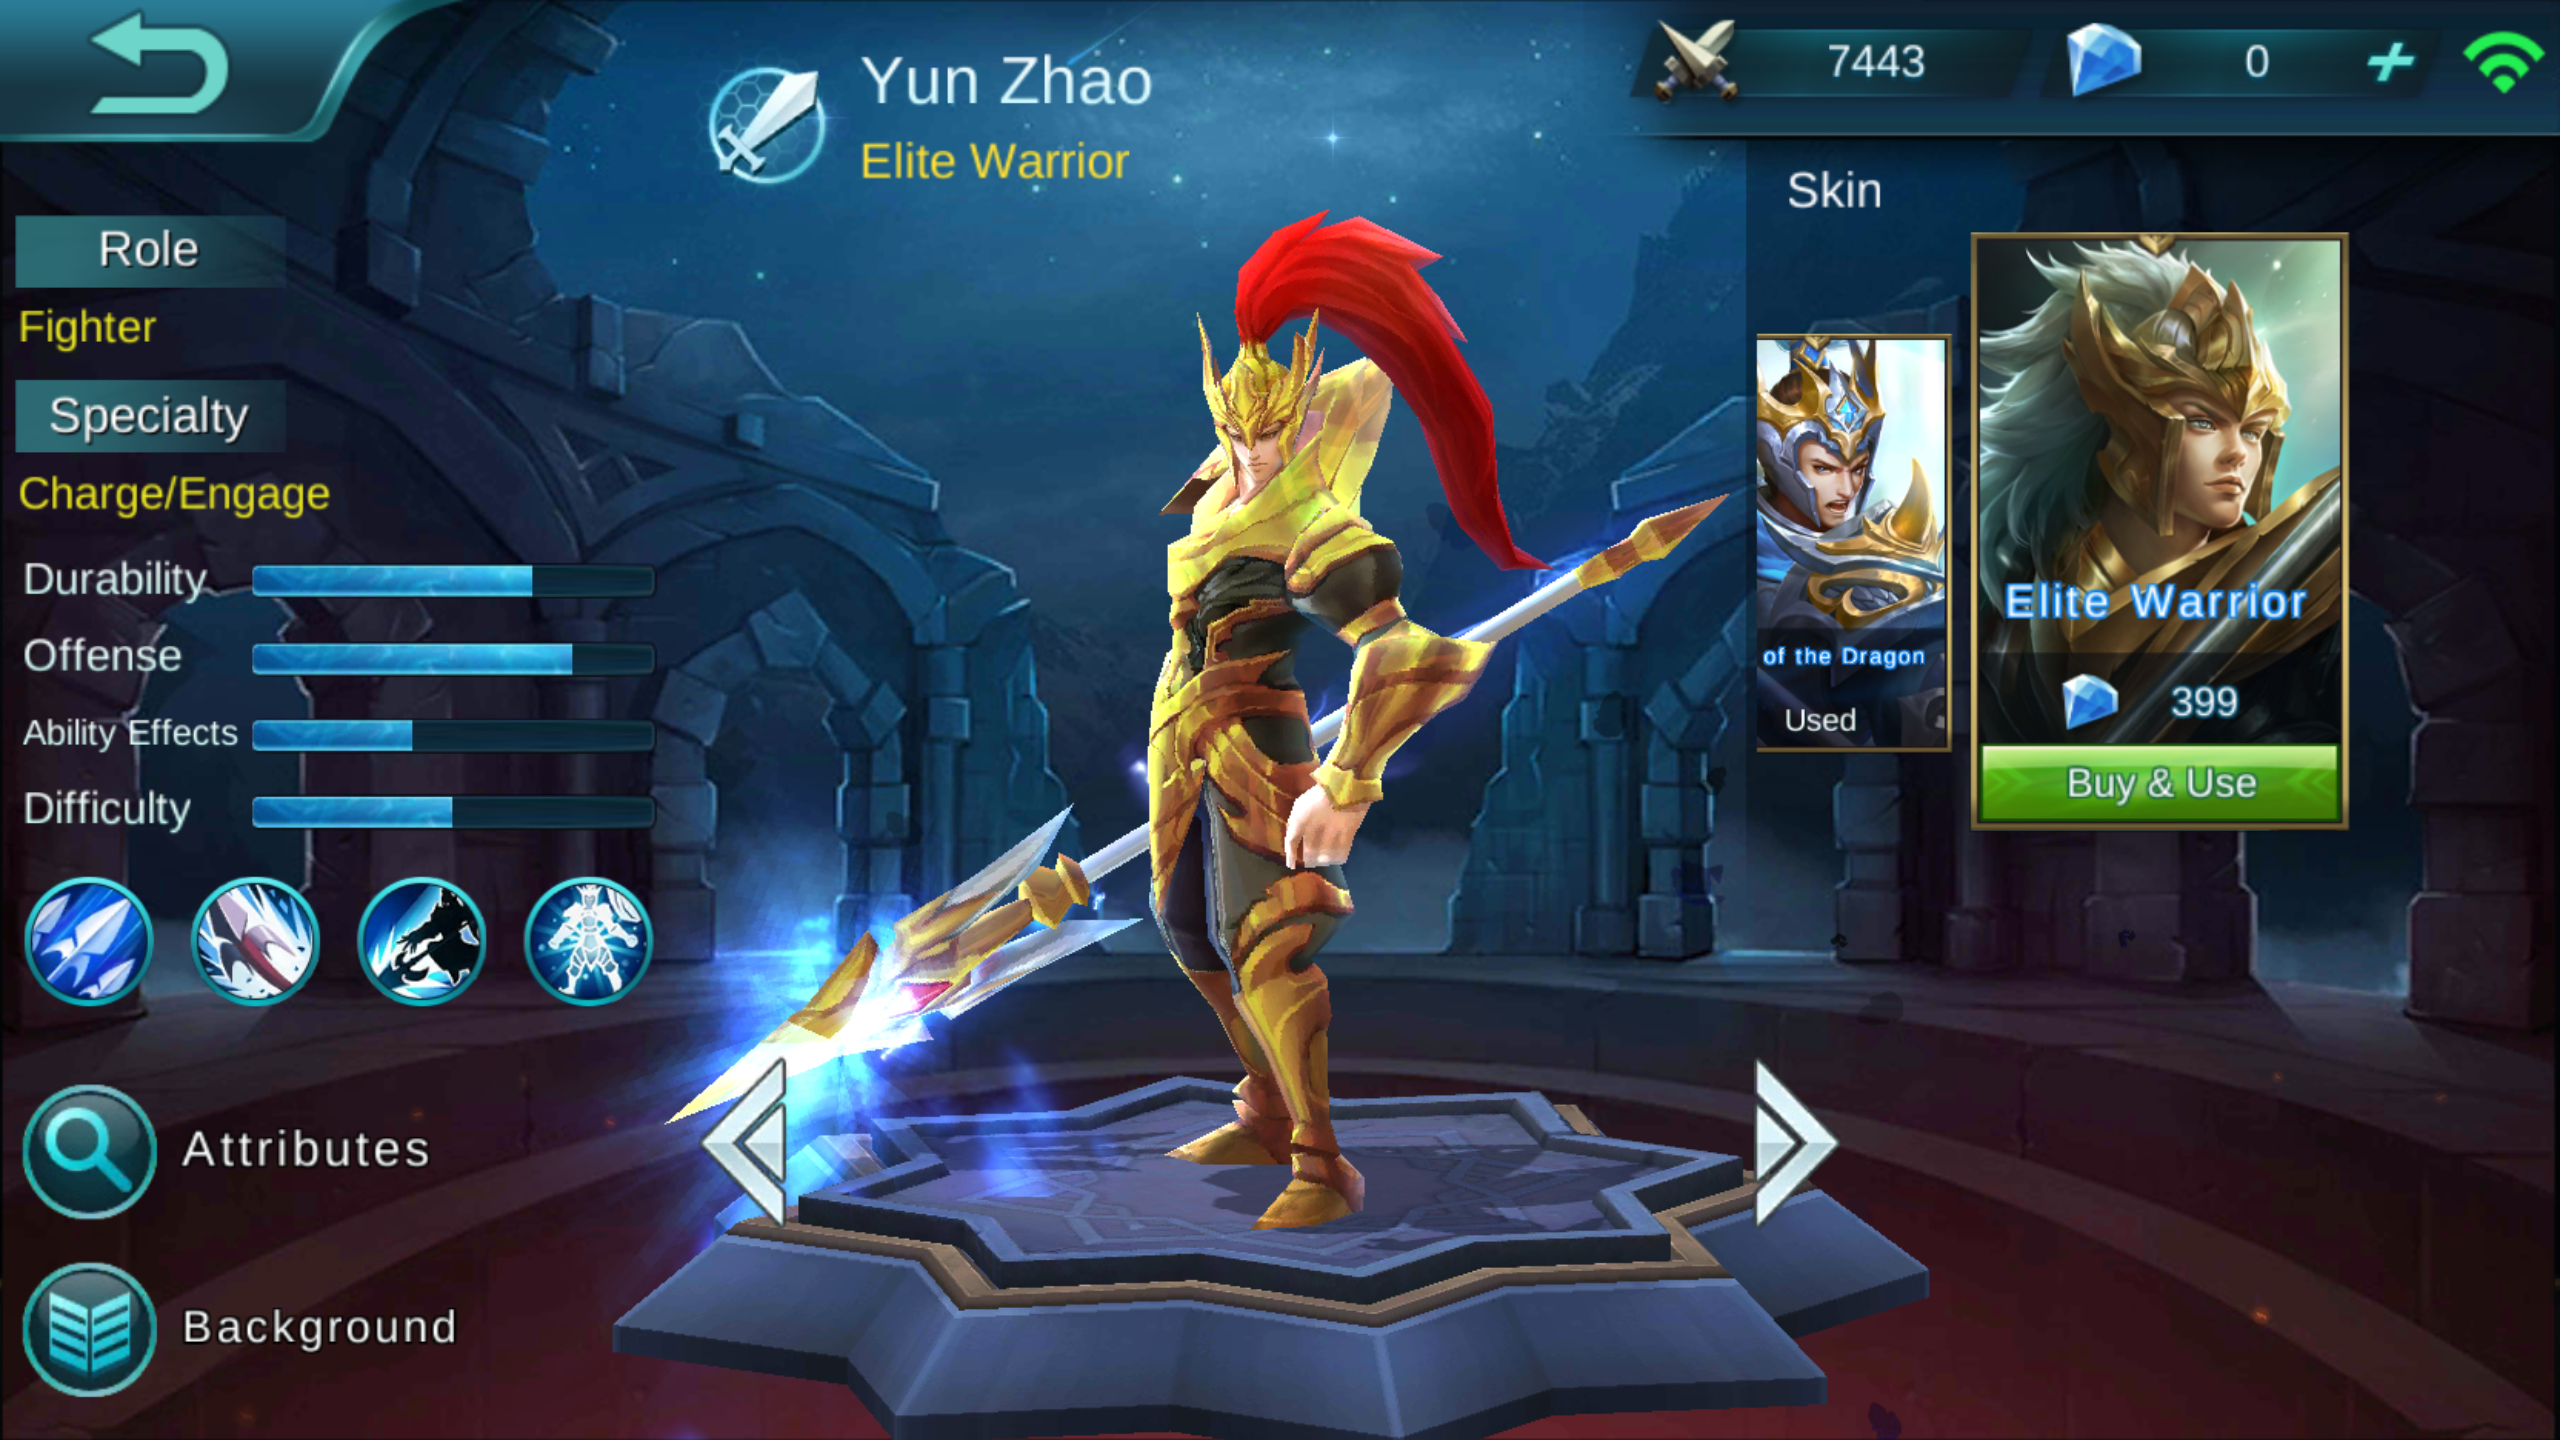 Yun Zhao Son Of The Dragon Re Mobile Legends Bang